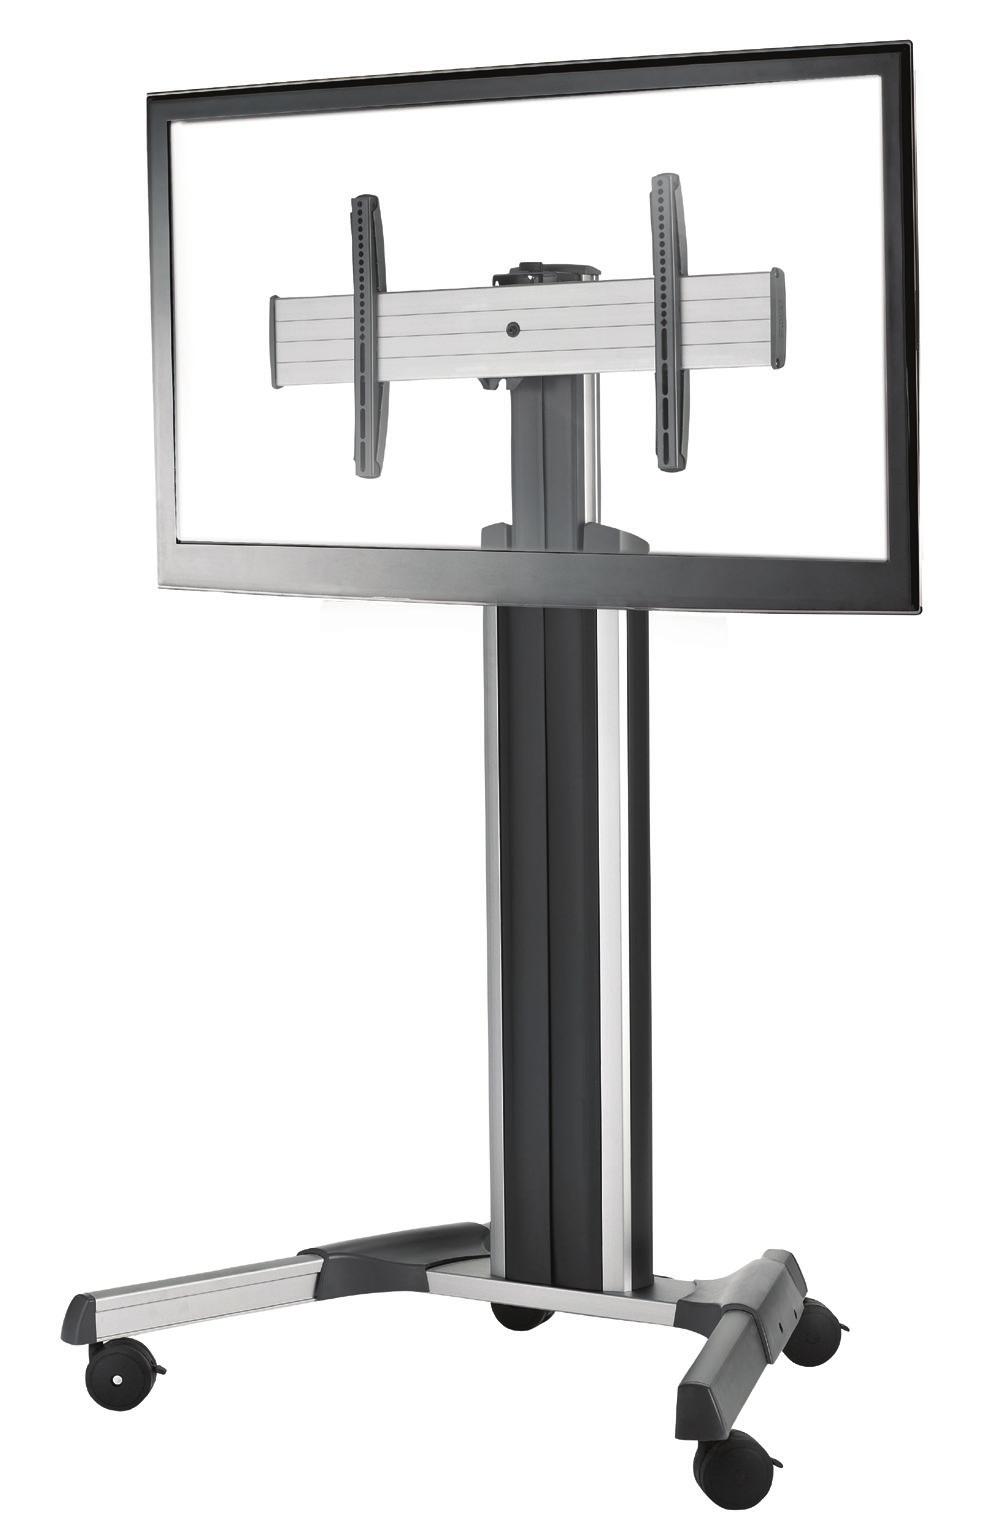 CART & STAND SOLUTIONS SINGLE DISPLAY CARTS AND STANDS Chief s Fusion Series single-display